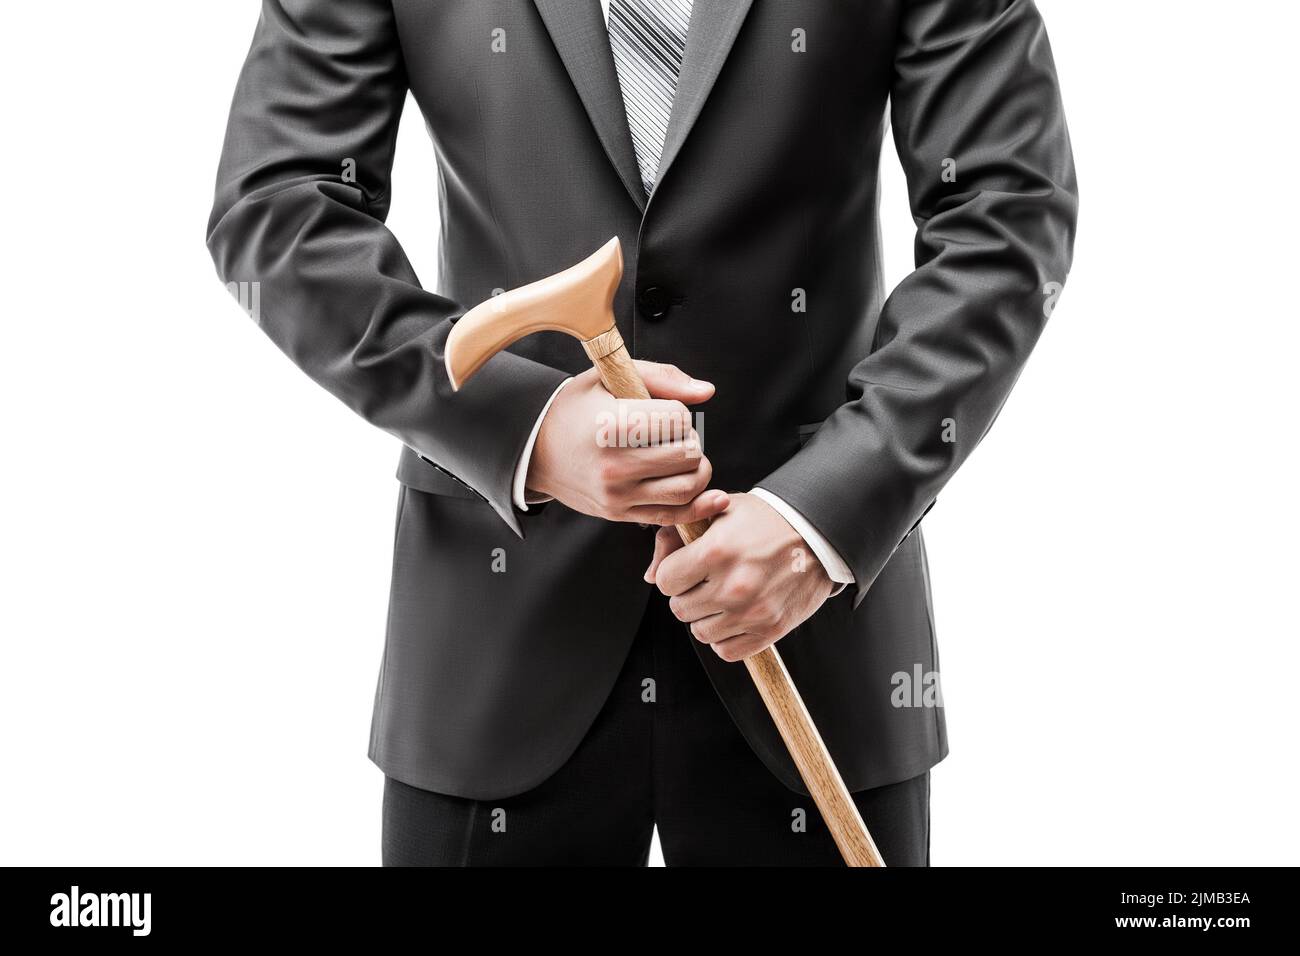 Businessman in black suit holding walking cane stick Stock Photo